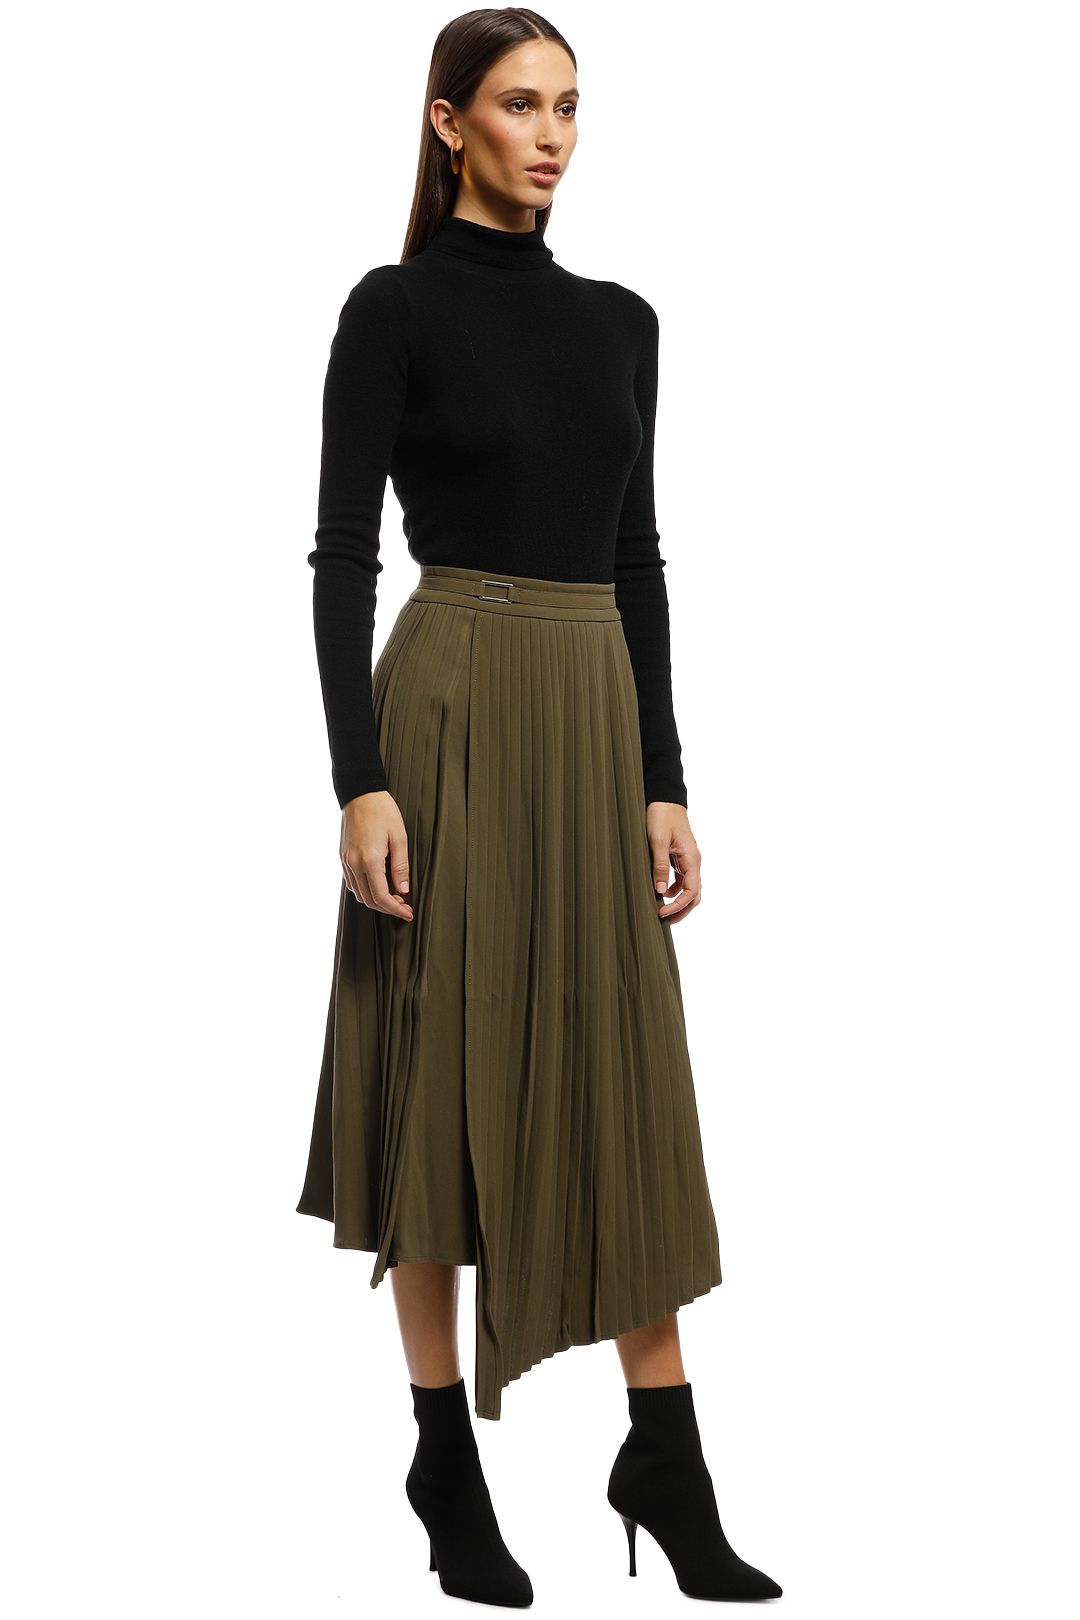 Friend of Audrey - Nathalie Pleated Asymmetry Skirt - Olive - Side